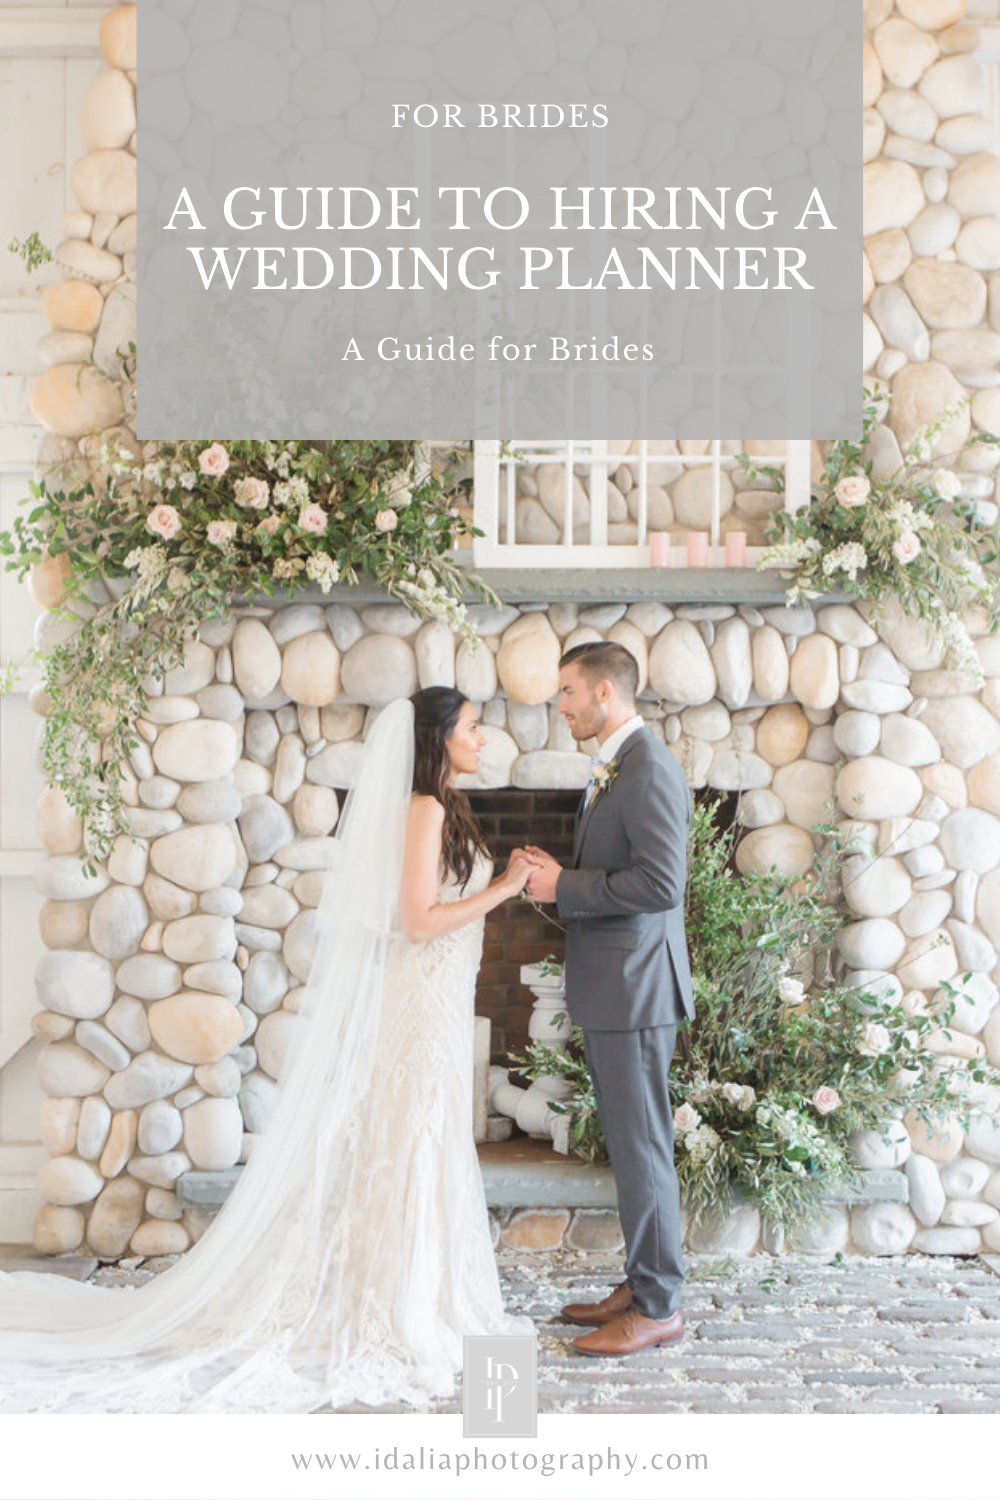 A Guide to Hiring a Wedding Planner